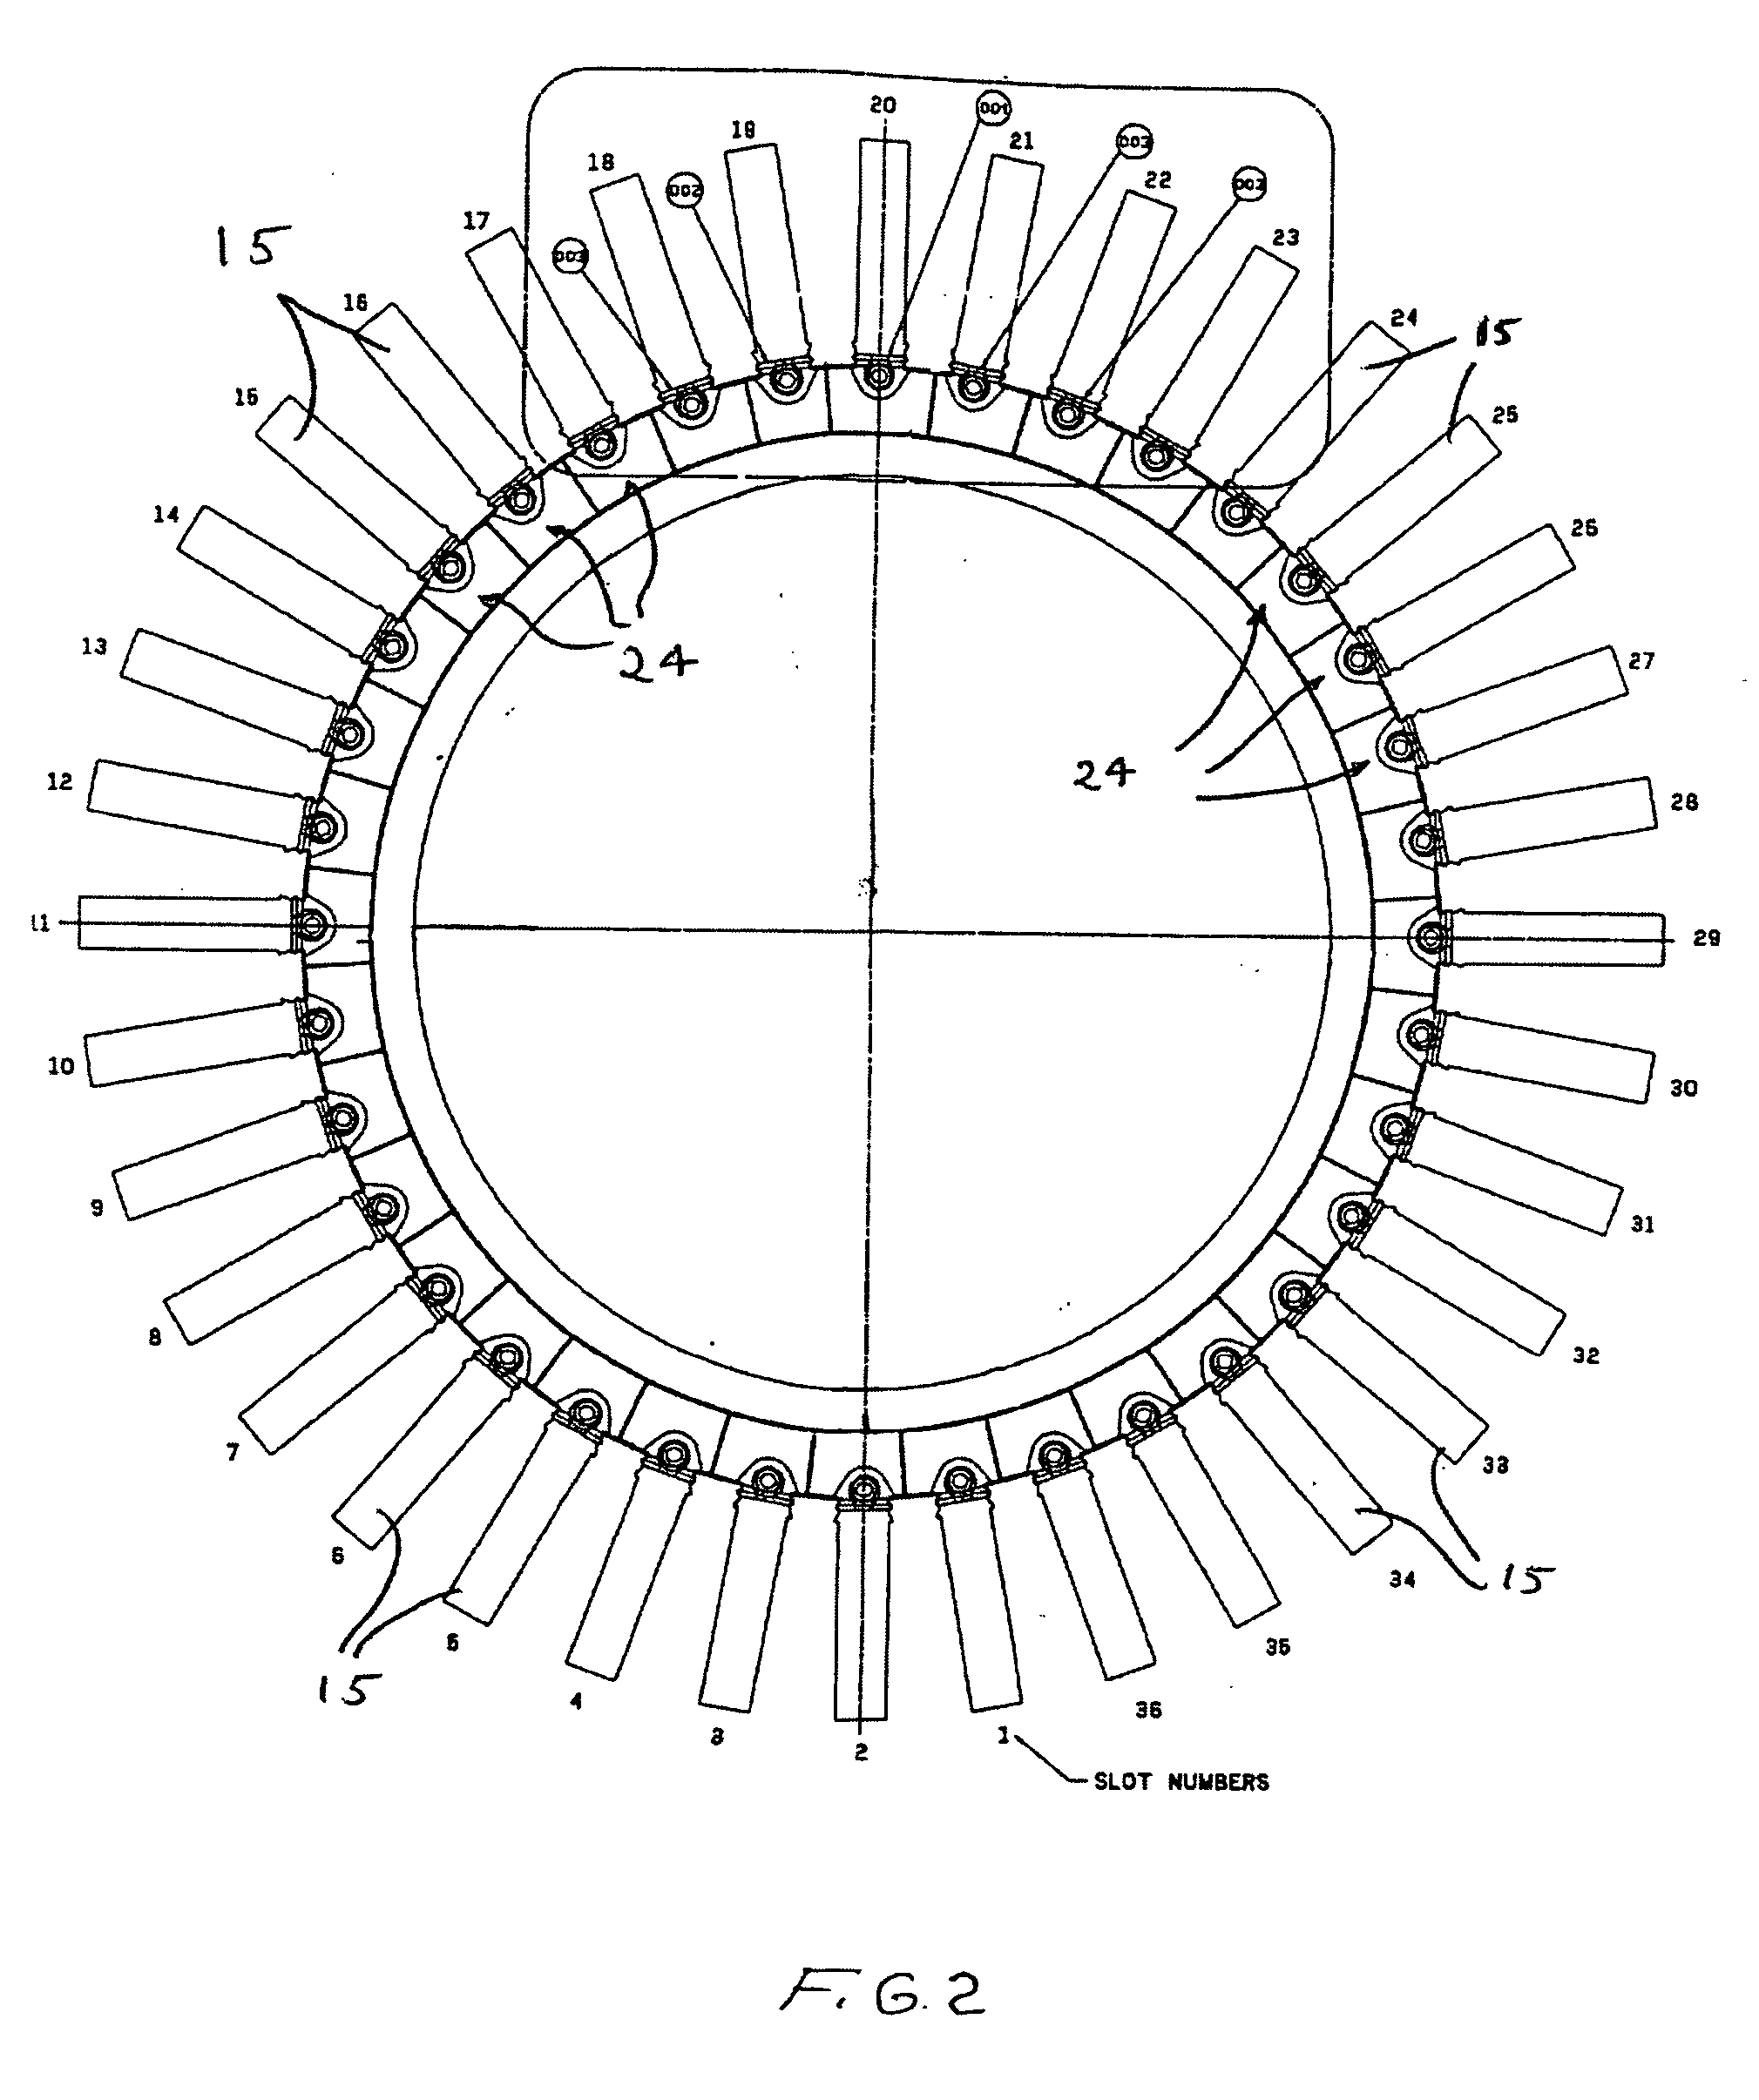 Air gap baffle assembly for gas-cooled turbine generator and method of installing